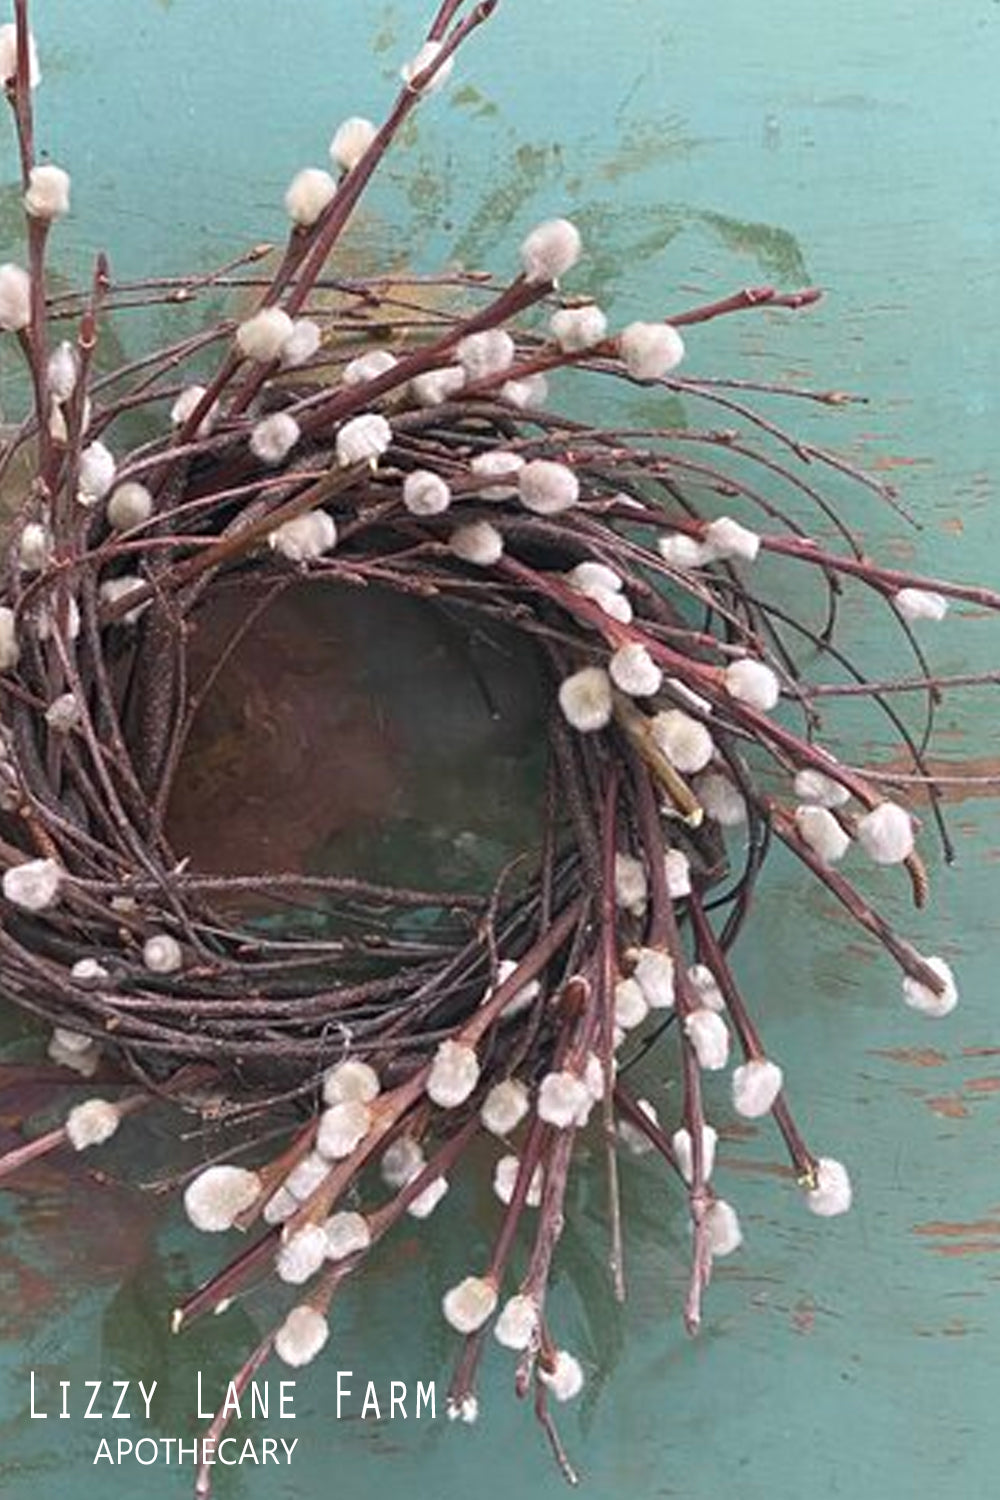 pussy willow wreath